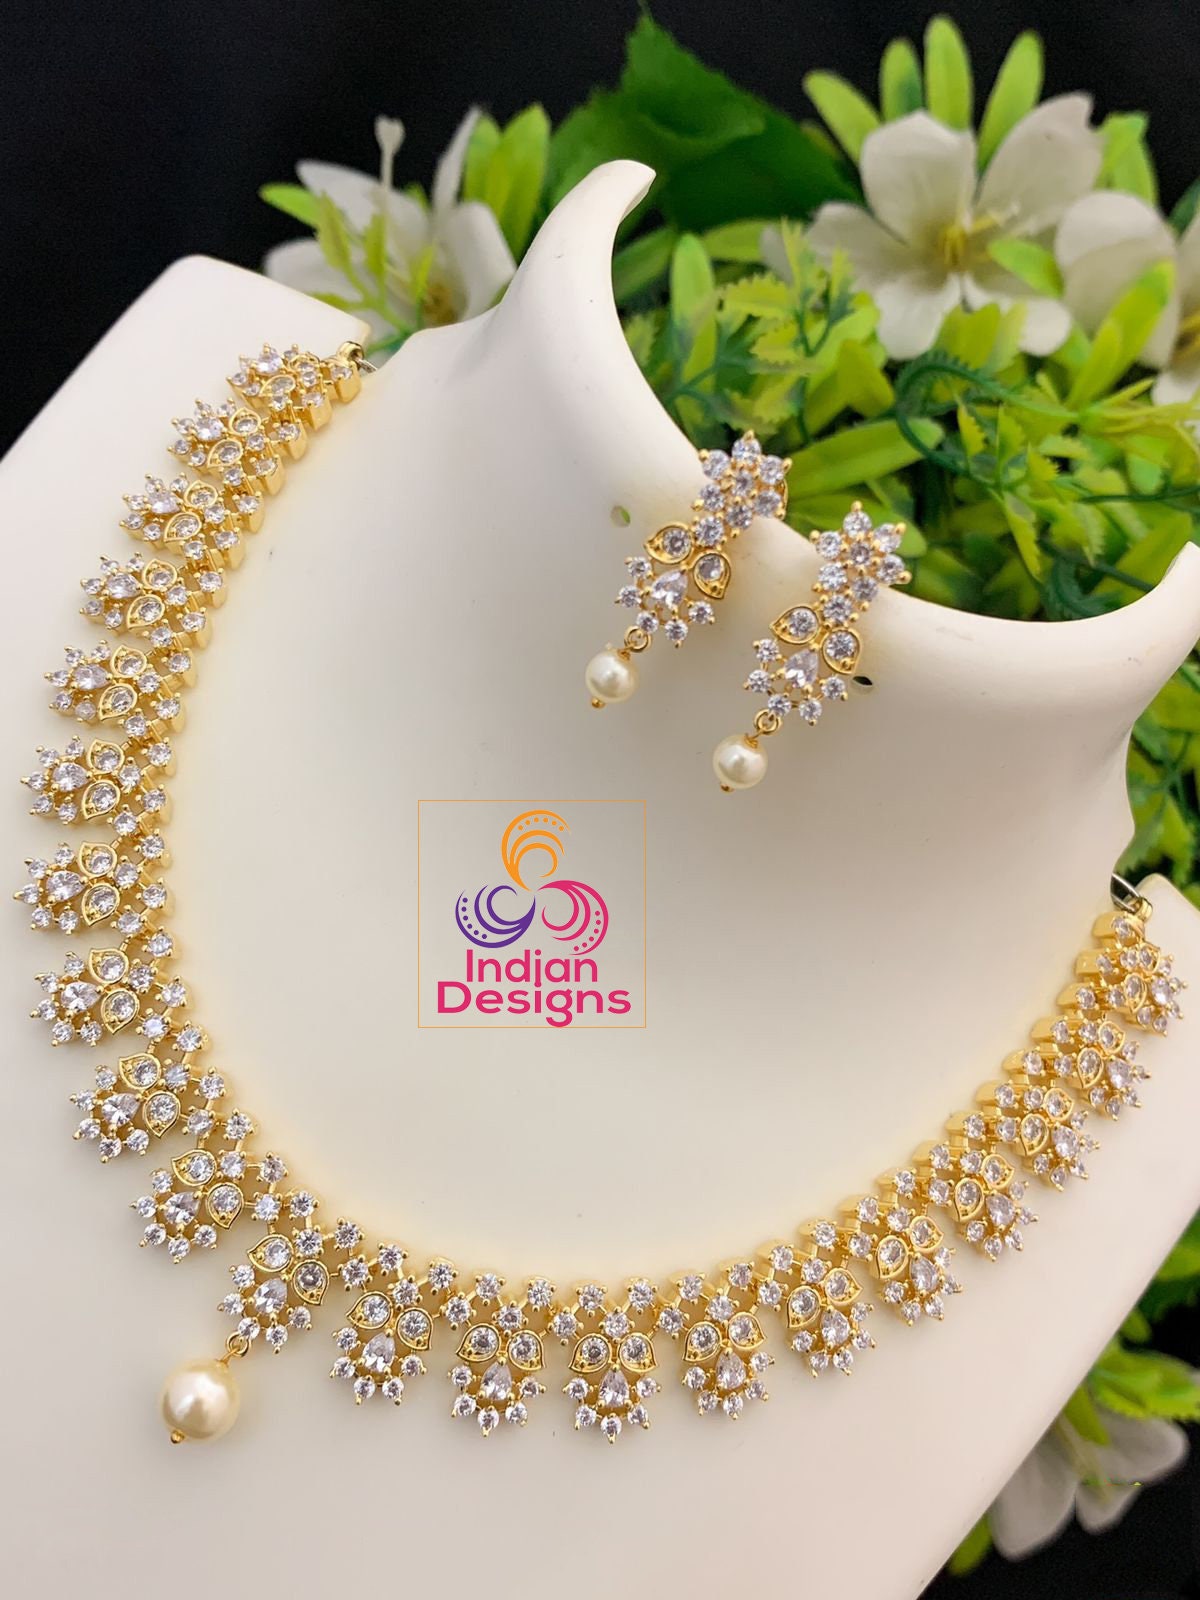 South Indian CZ Necklace jewelry design | American diamond choker necklace set | Gold tone emerald necklace | Ruby stone flower necklace